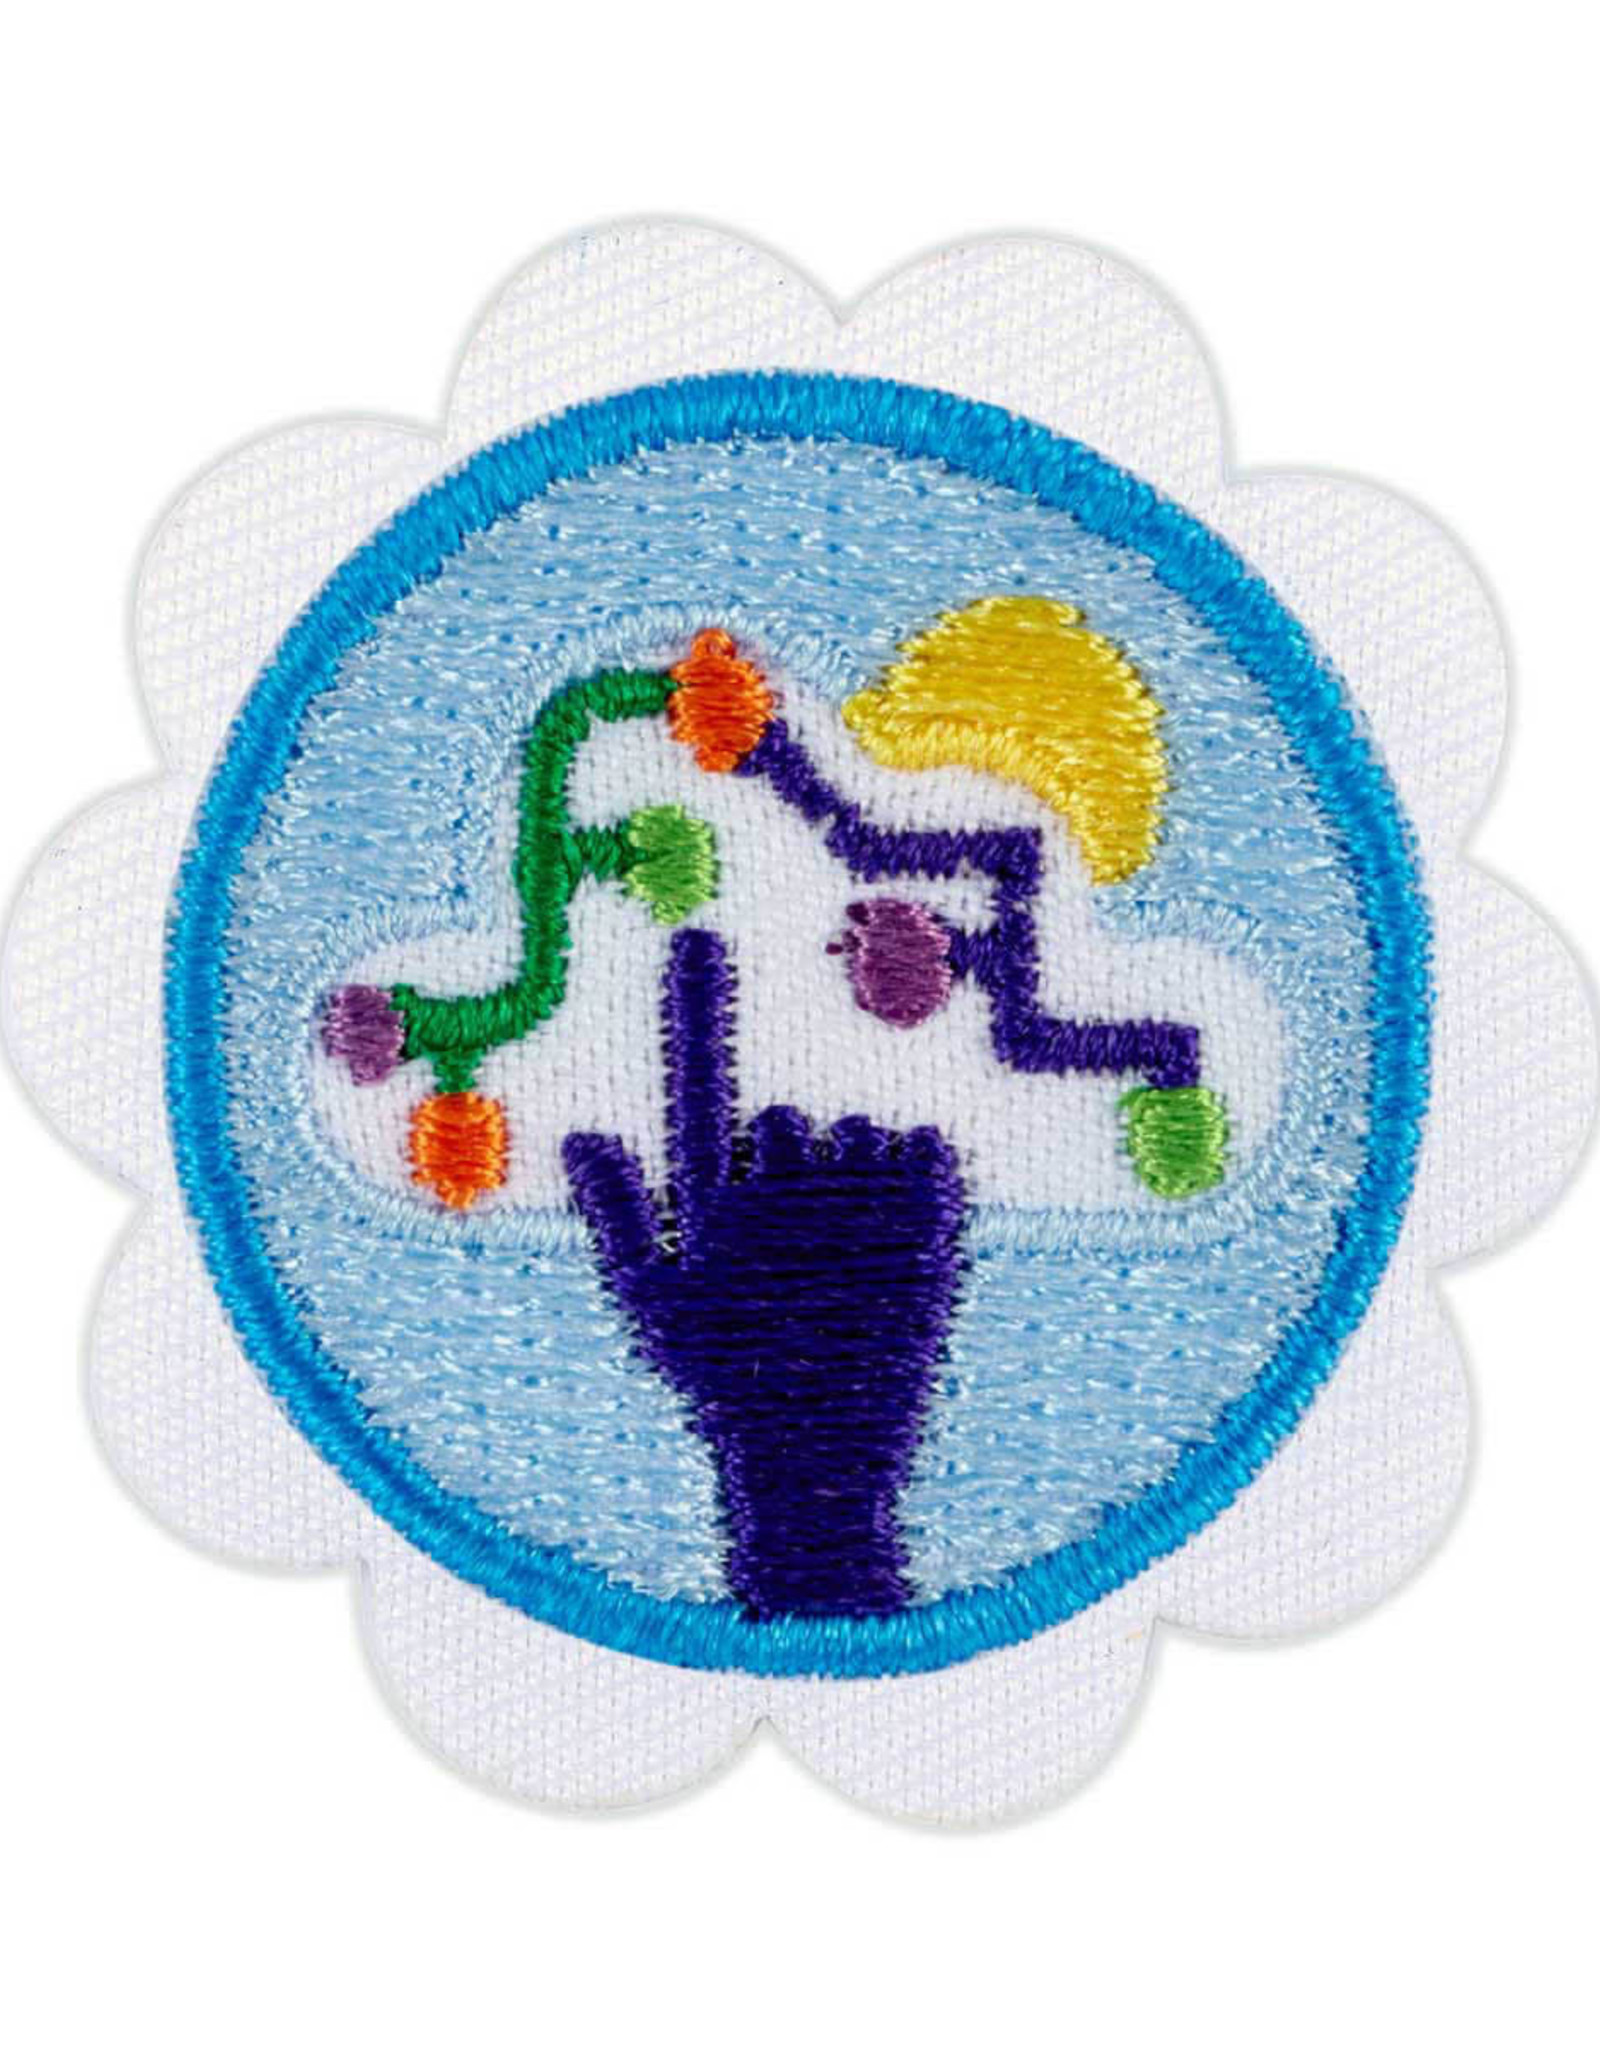 GIRL SCOUTS OF THE USA Daisy Digital Leadership  Badge